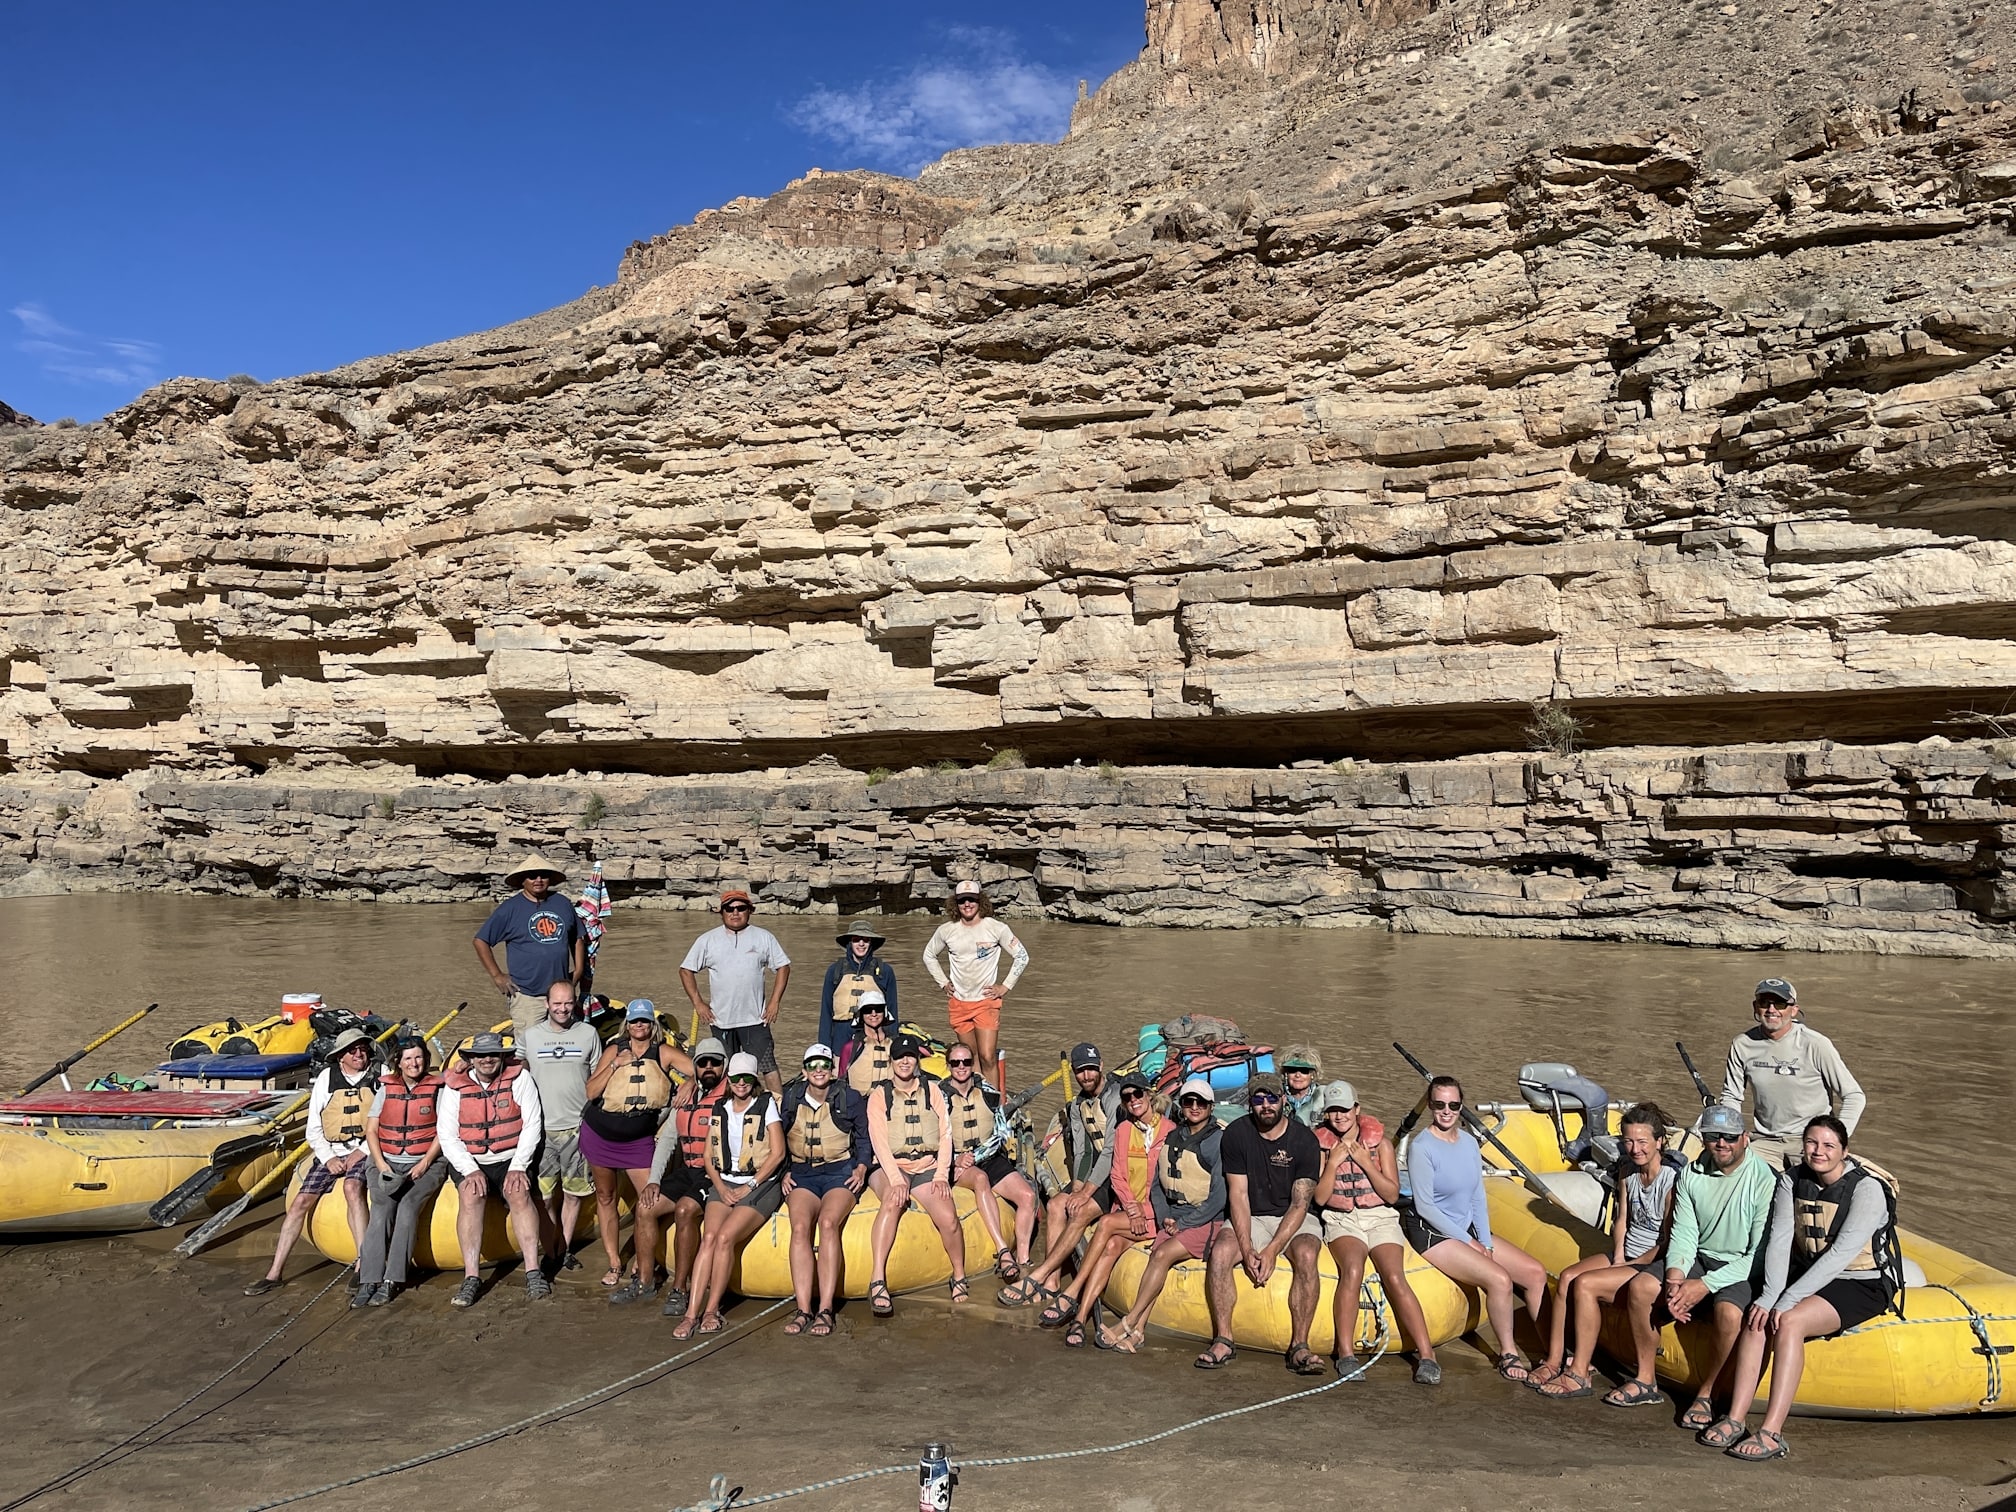 EBLS faculty during a learning retreat to the San Juan River. The rapids called “The Ledge” were located just upstream of this photo. Courtesy & © Joseph Kozlowski, Photographer